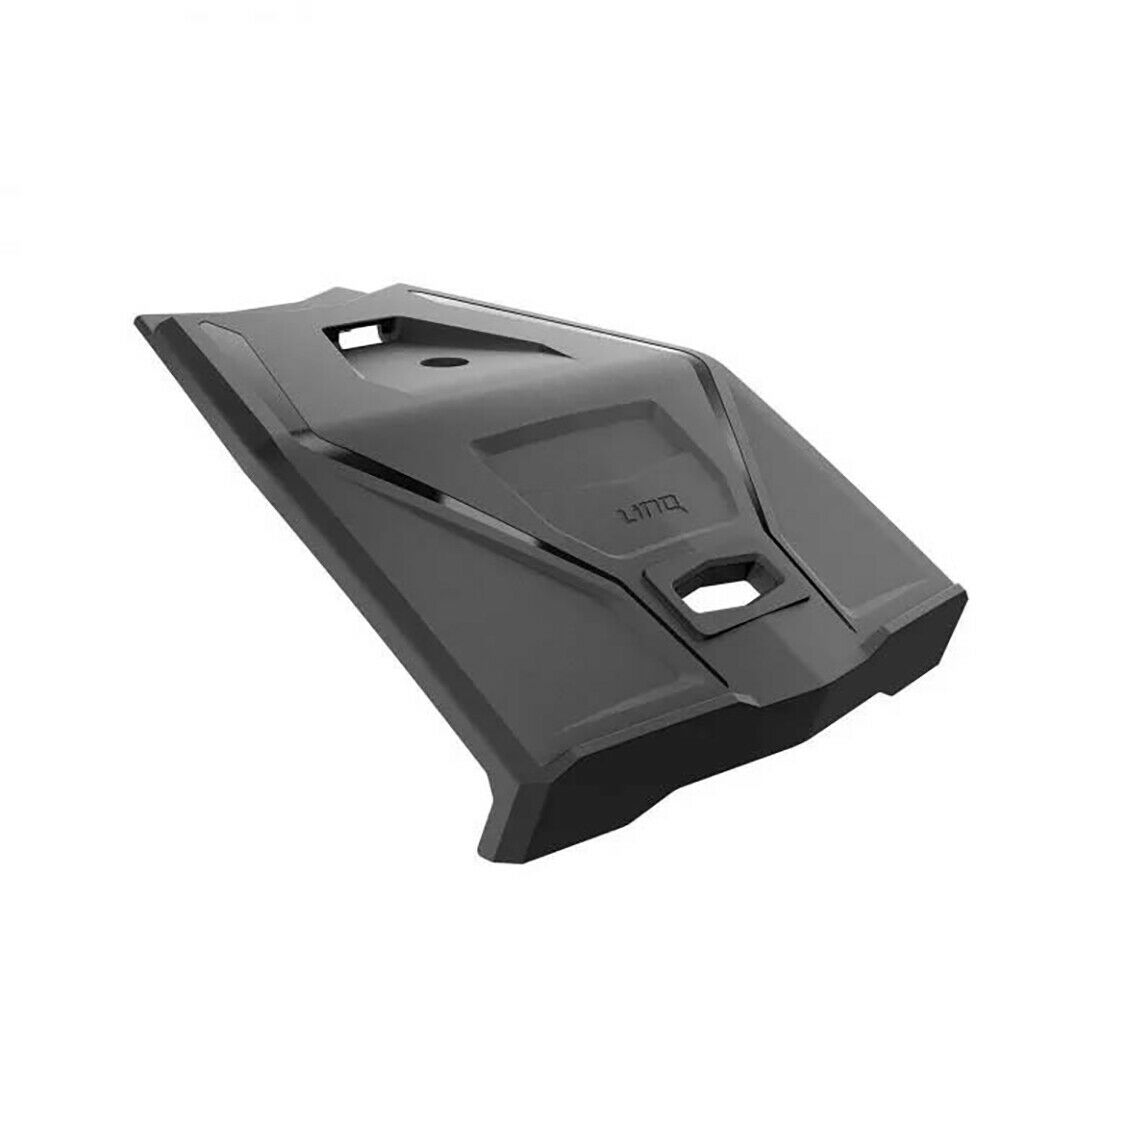 Ski-Doo Low Profile Battery Compartment Cover 860201505